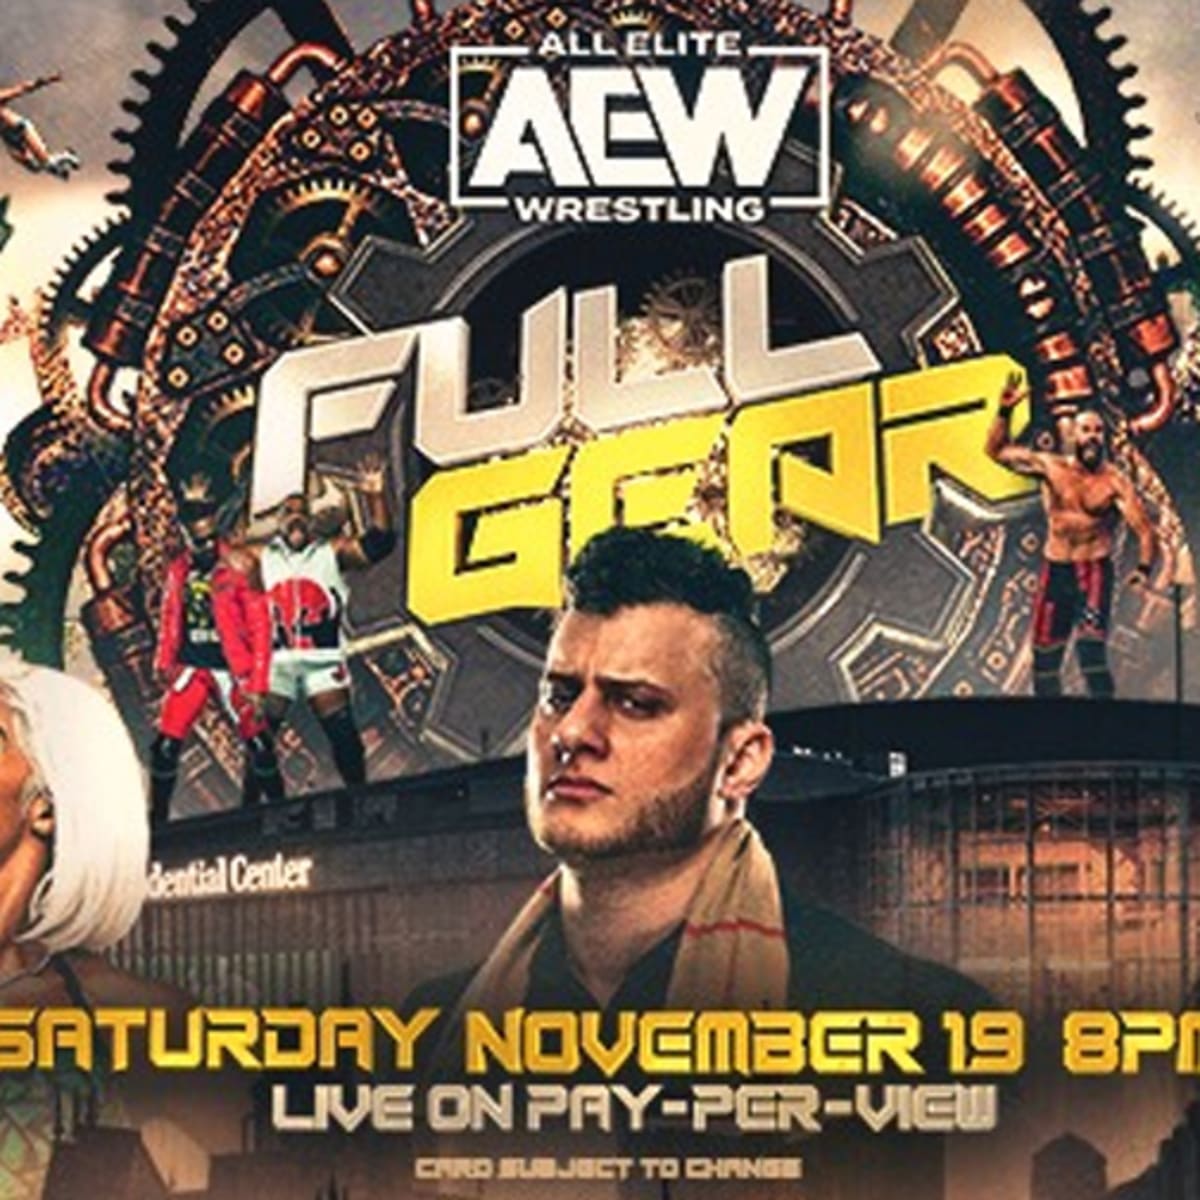 AEW: FULL GEARPay-Per-View to Stream on Bleacher Report Saturday, Nov. 19  at 8 PM ET for $49.99